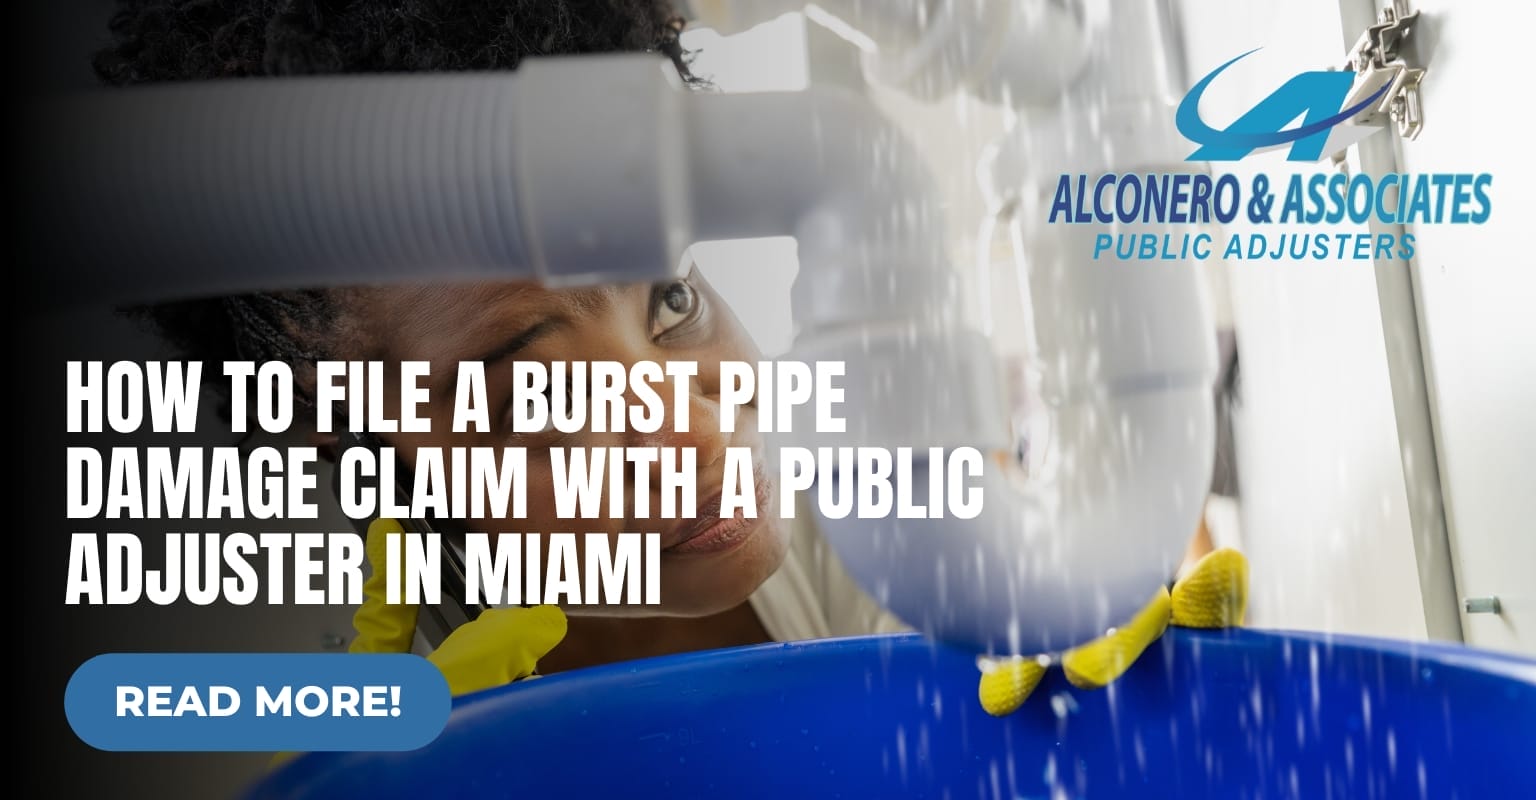 How to File a Burst Pipe Damage Claim with a Public Adjuster in Miami